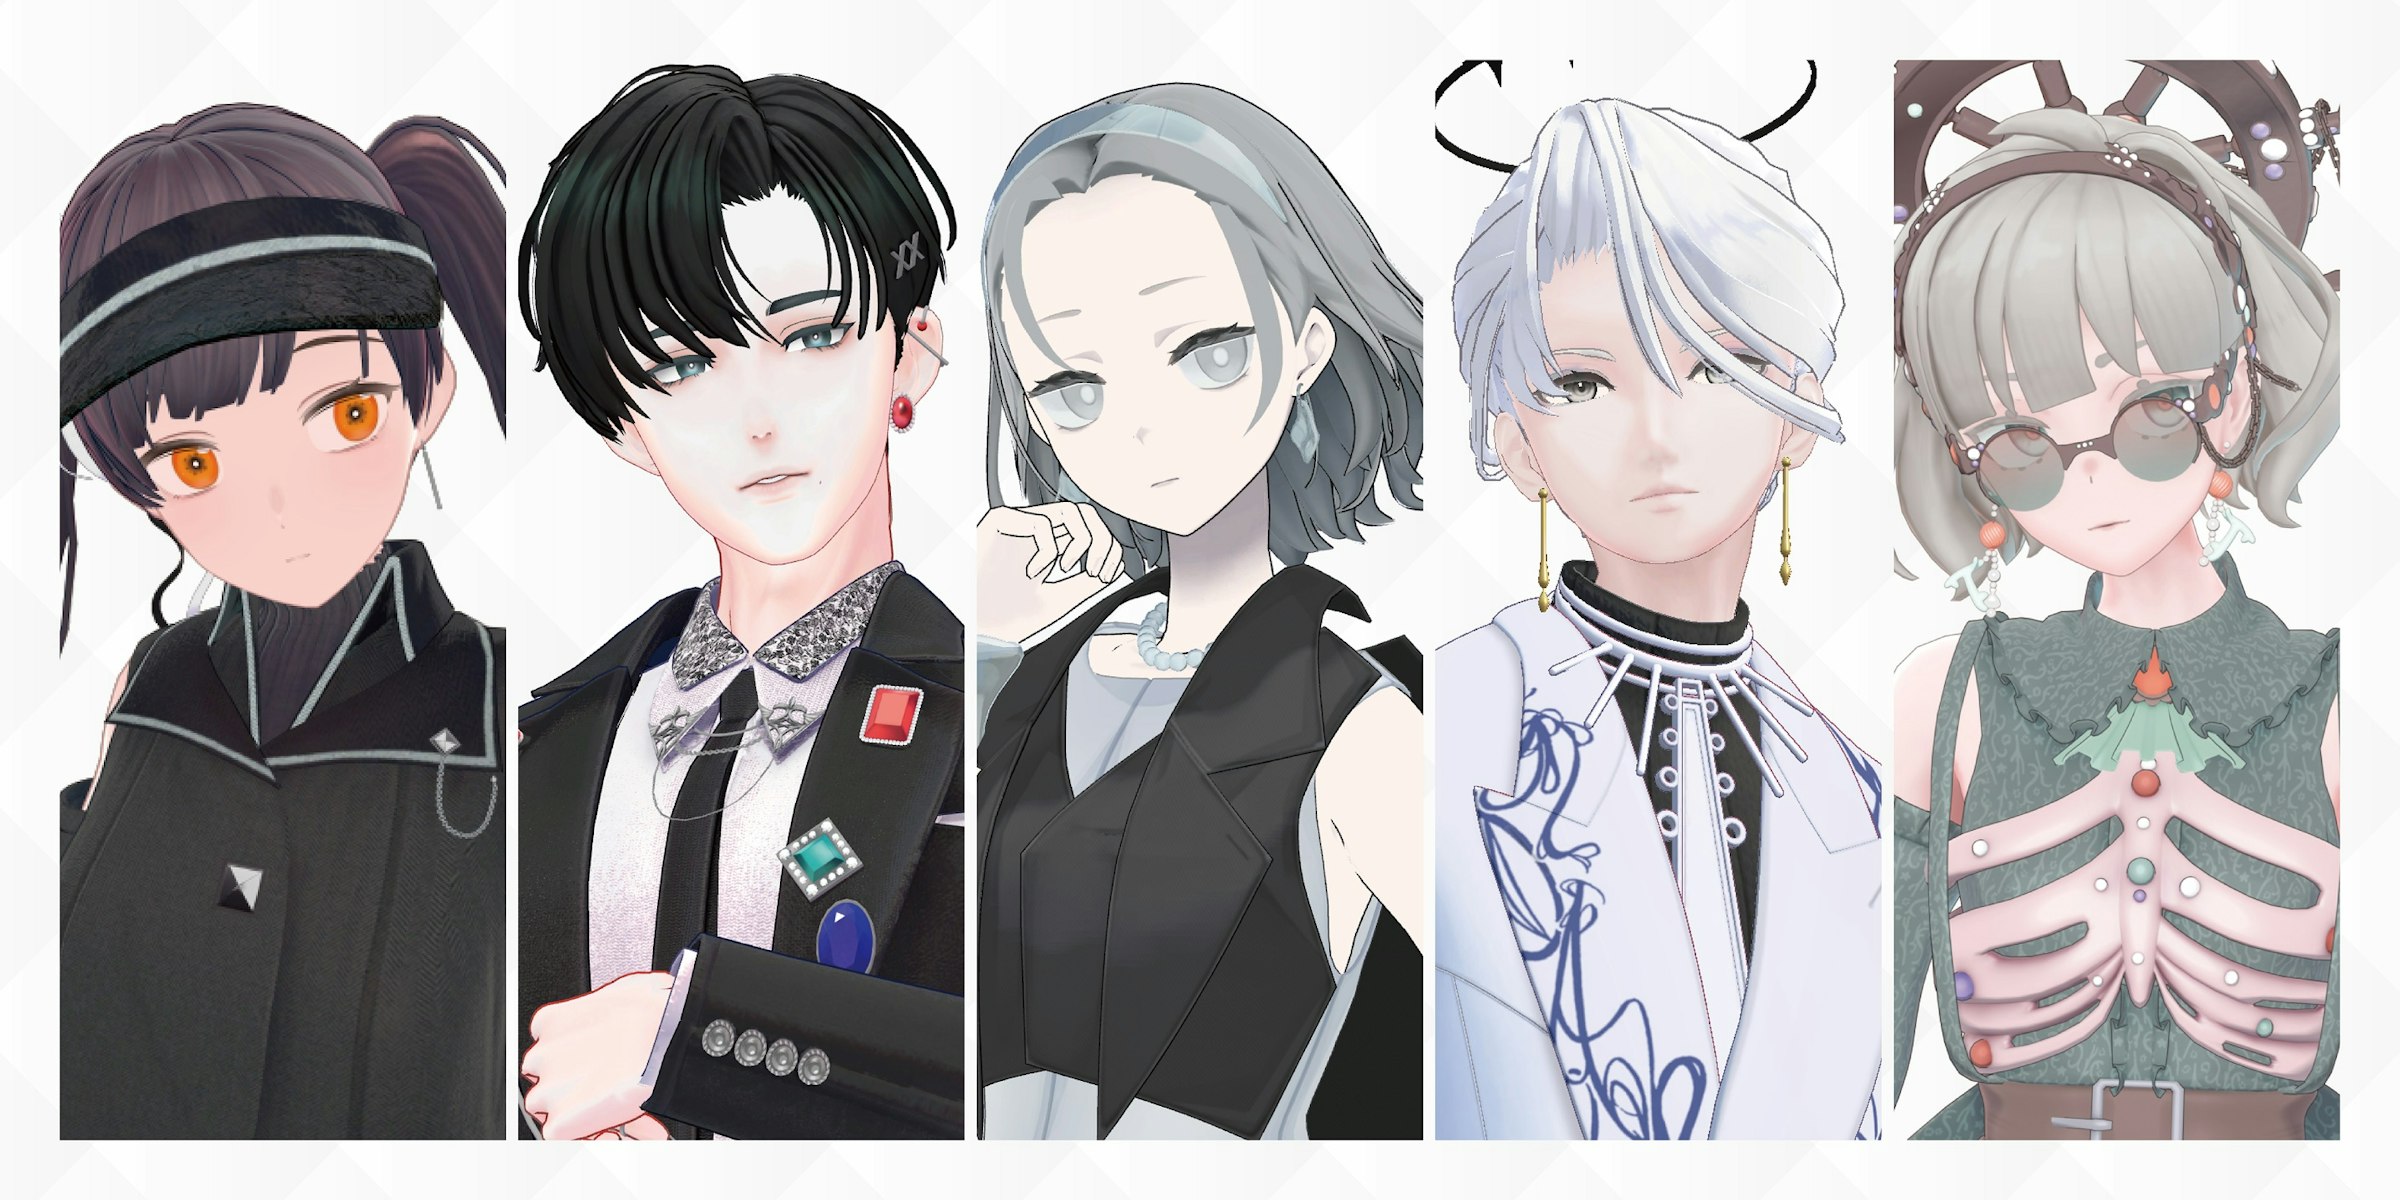 First launch of original 3D avatars. From left, 'Sachika', 'Ageha', 'Furi', 'Ryusei', and 'Cocohime'